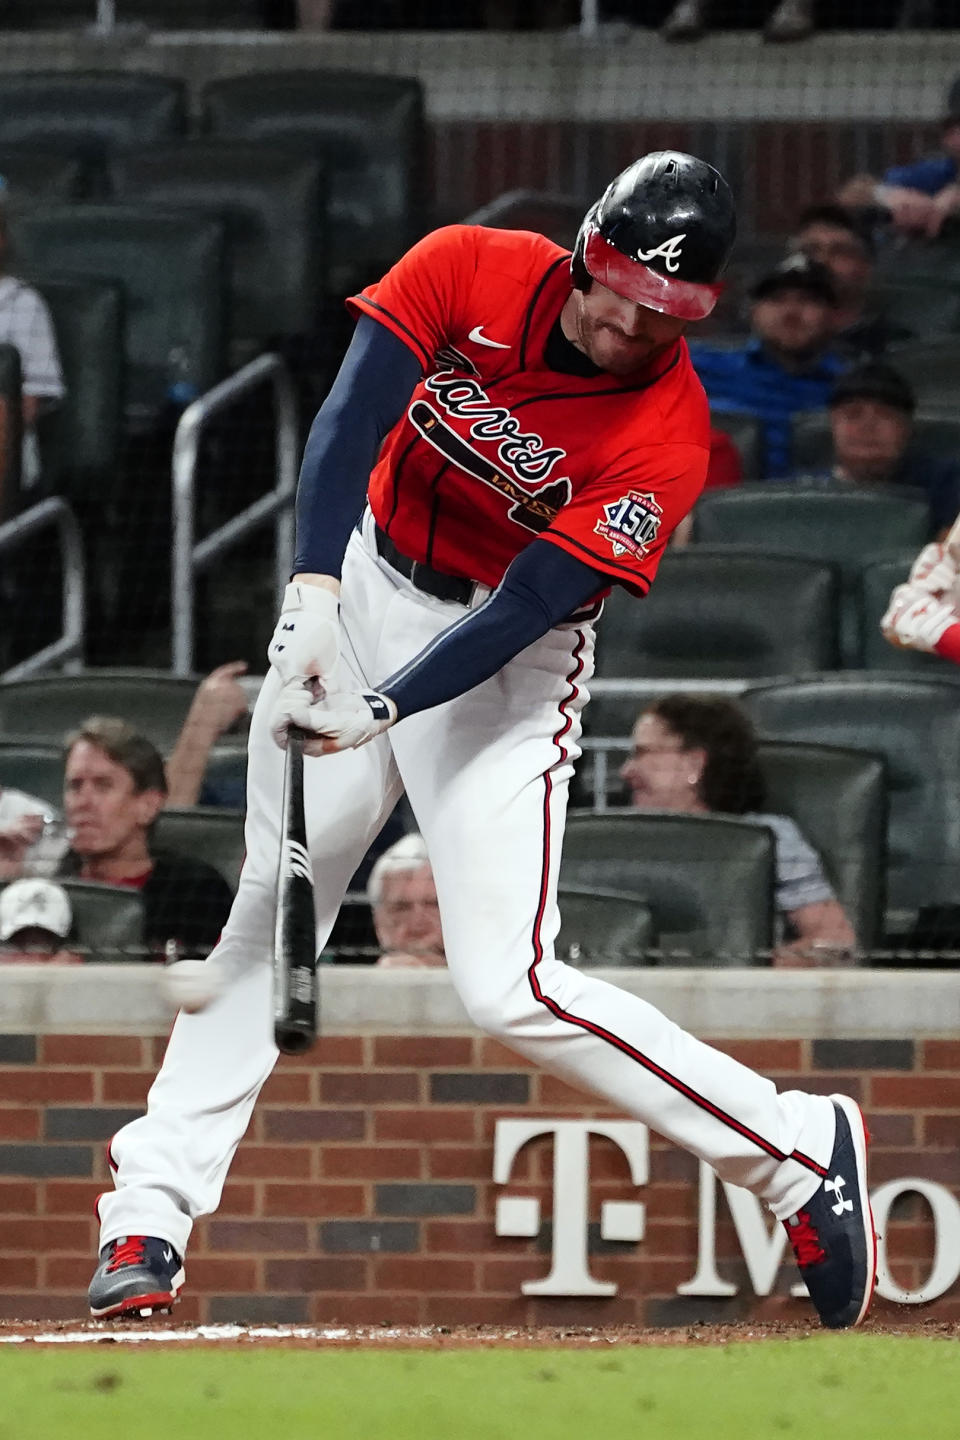 Atlanta Braves' Freddie Freeman drives in two runs with a single in the eighth inning of a baseball game against the Washington Nationals, Friday, Aug. 6, 2021, in Atlanta. (AP Photo/John Bazemore)